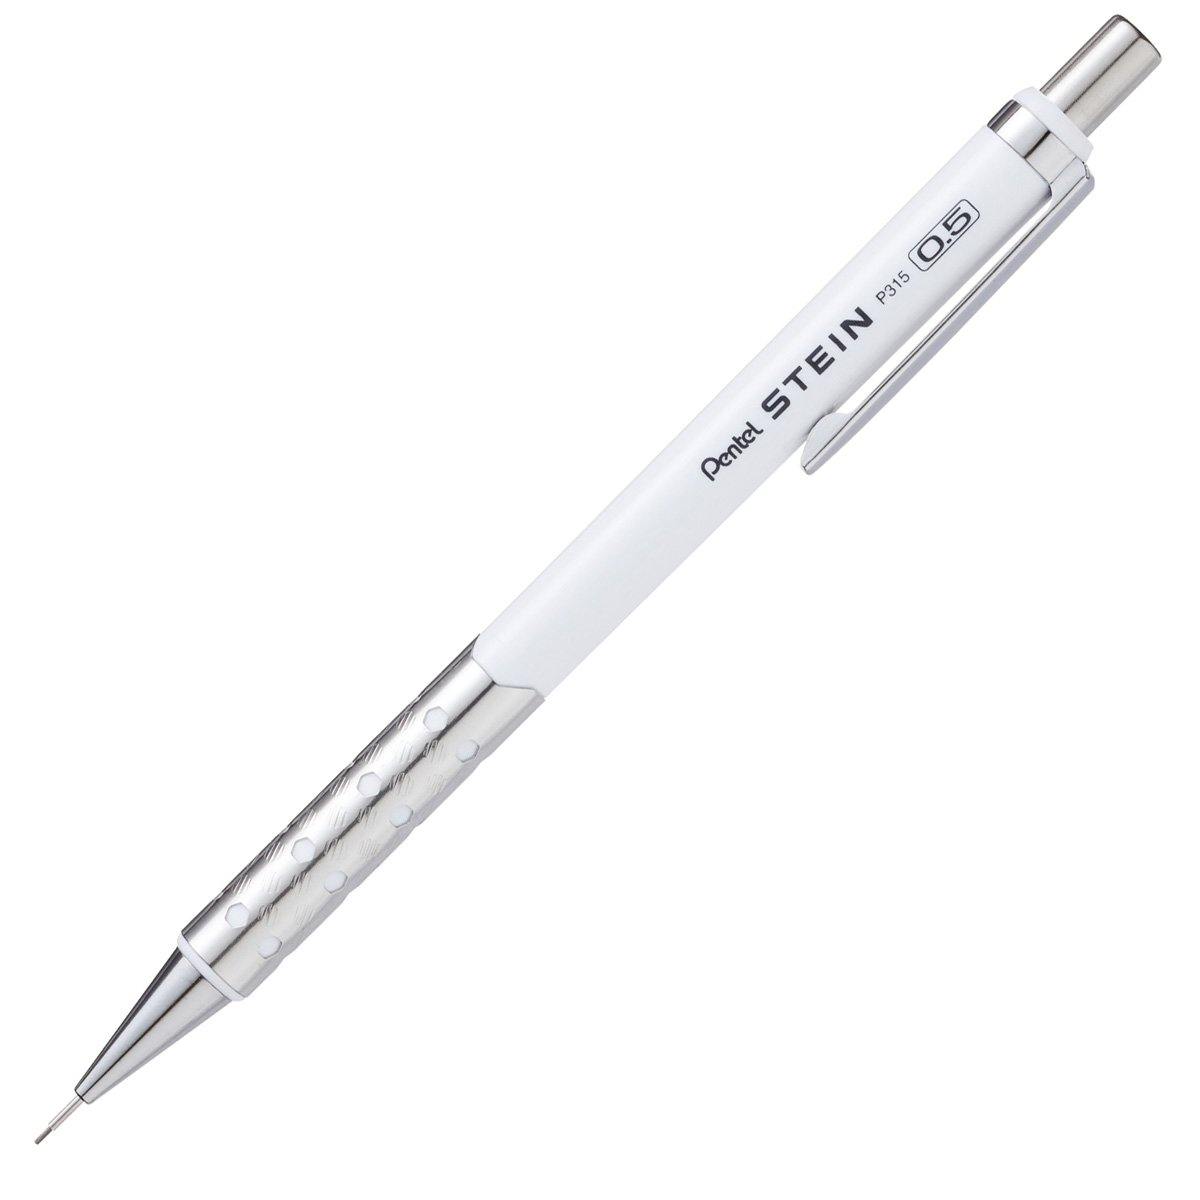 Pentel Stein Mechanical Pencil 0.5mm - White Body | papermindstationery.com | boxing, Pencils, Pentel, sale, Stationery, Writing Tools